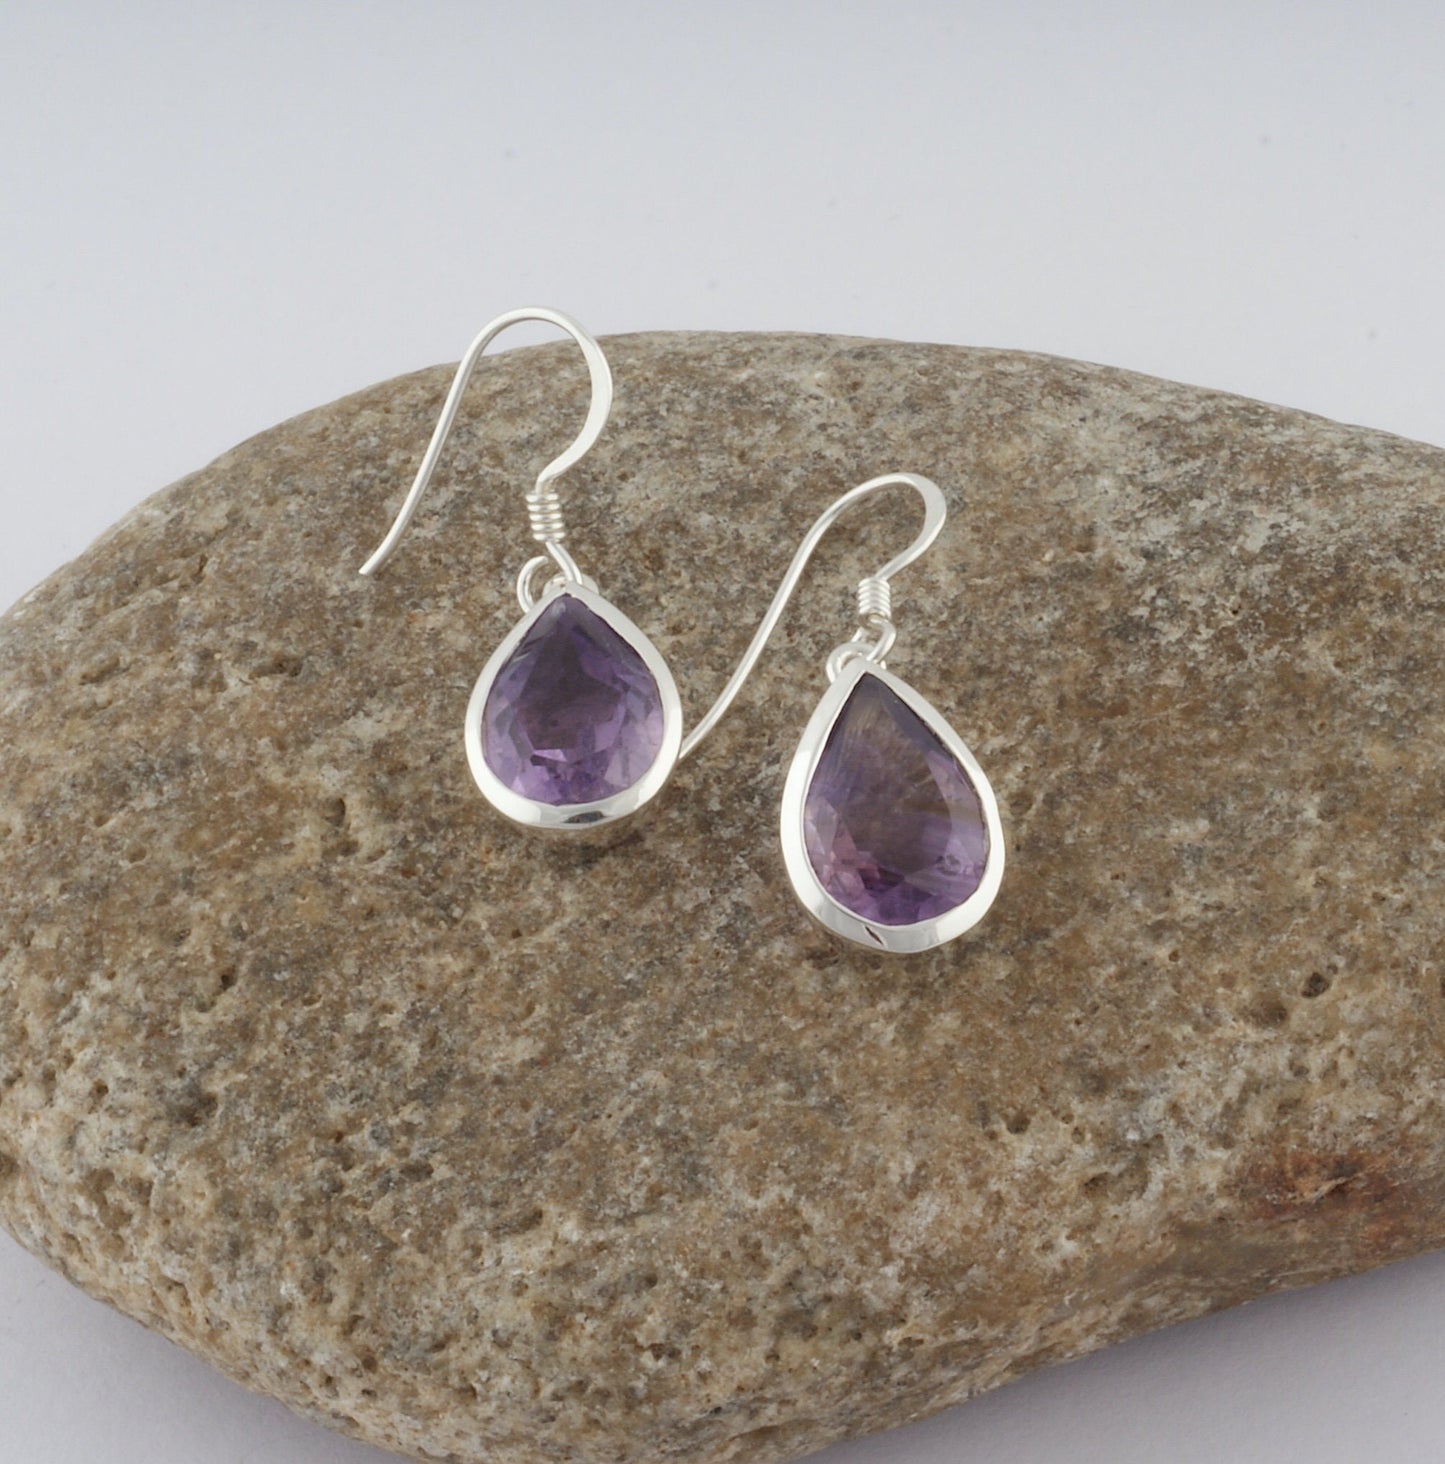 Amethyst Earring in Dangle Earwire, Birthday, Anniversary, Women, Teenager/ Girls, Gift for her. Quirky / Dainty Solid 925 Sterling Silver